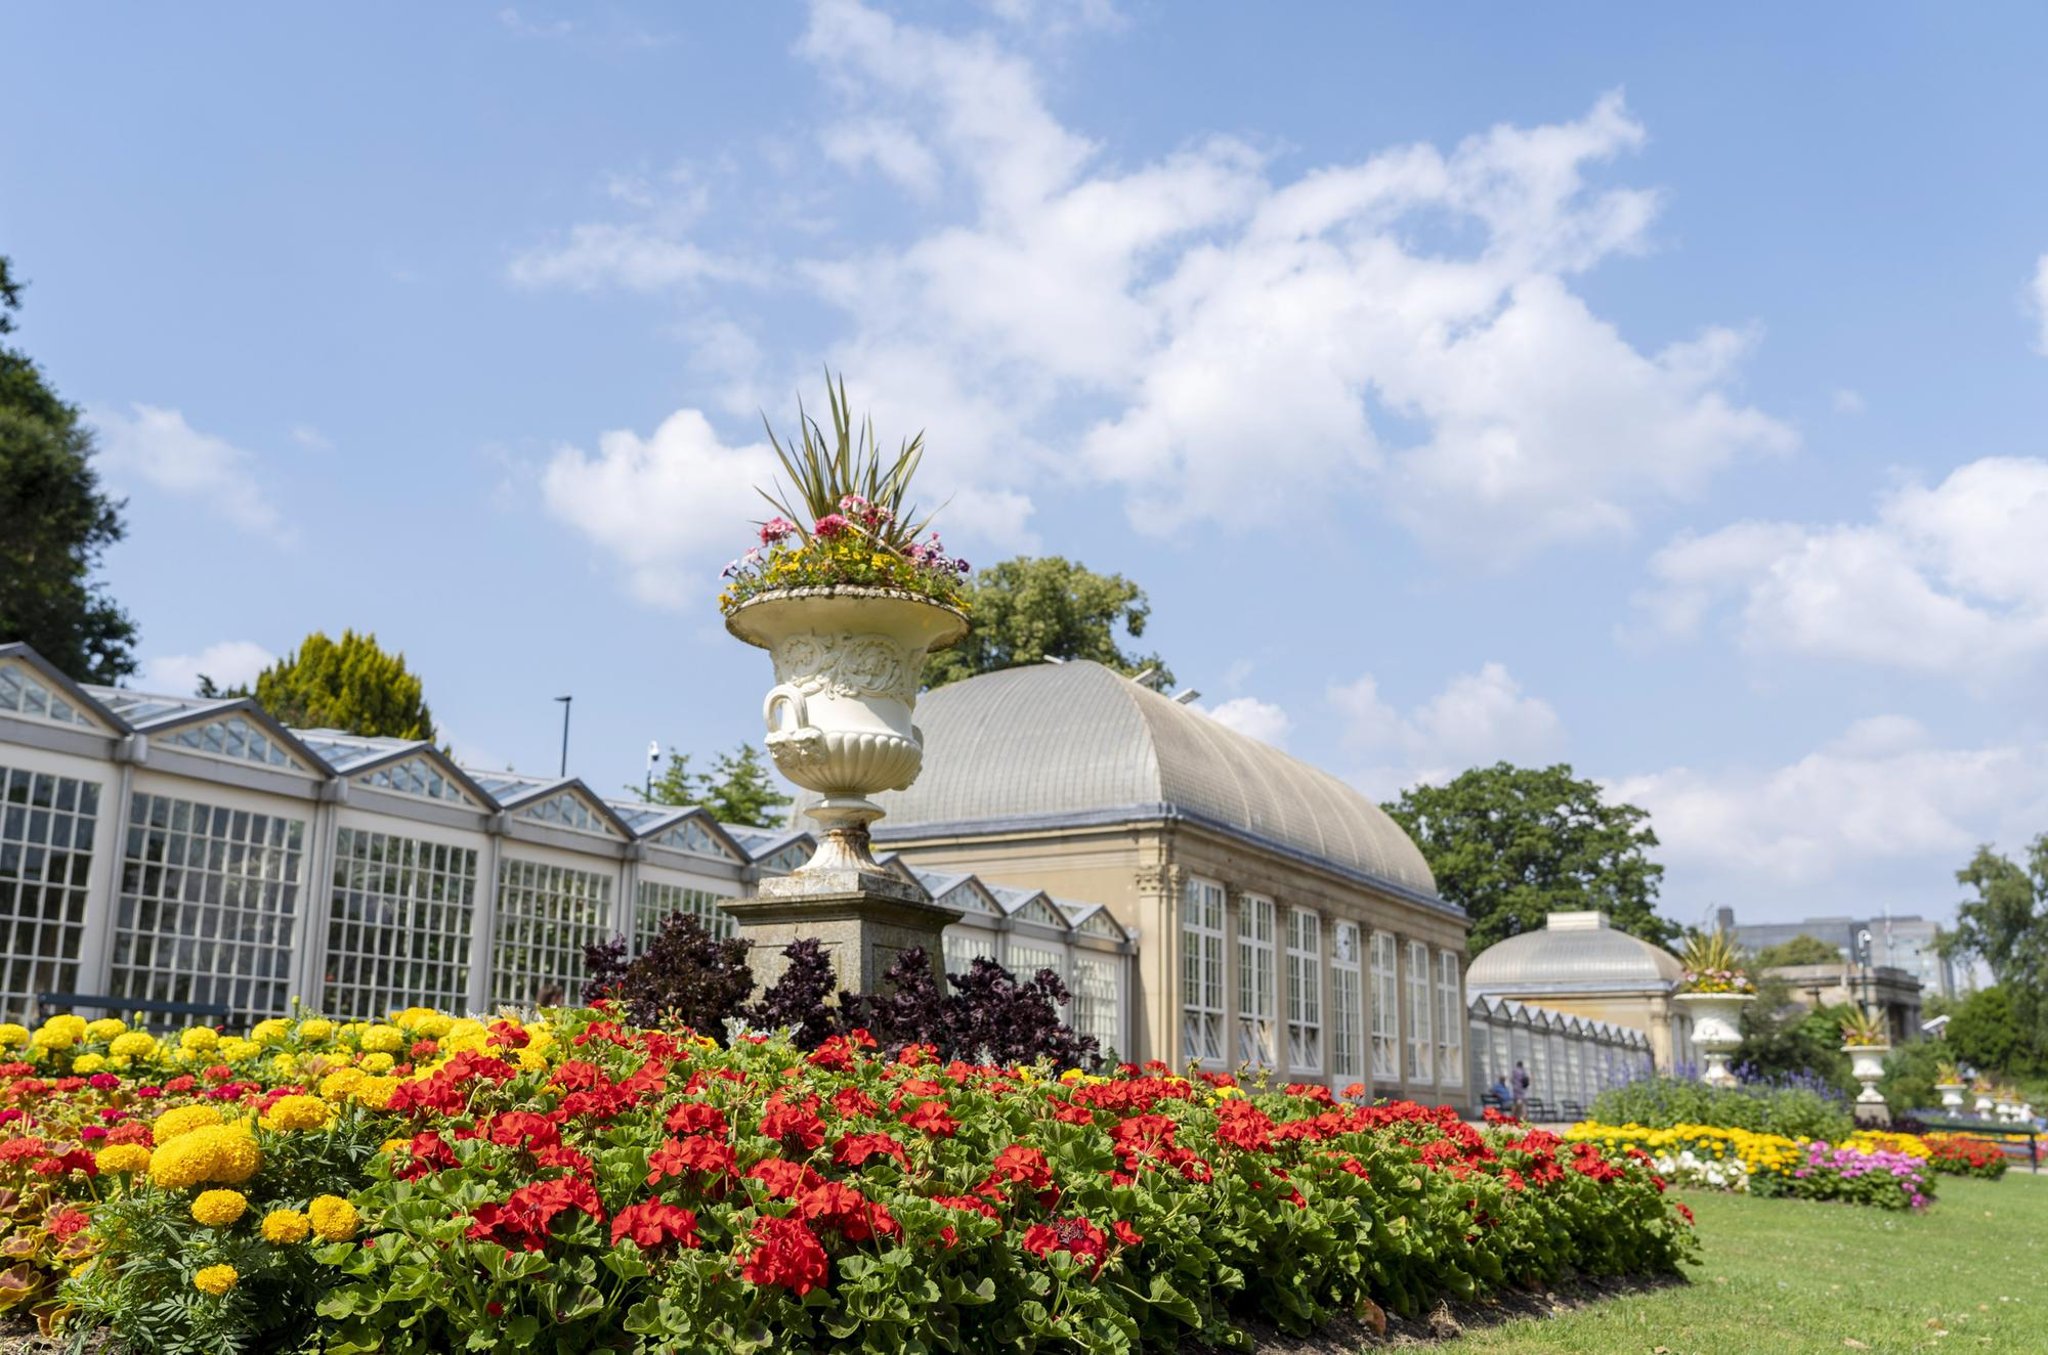 Sheffield's Botanical Gardens named as 'one of the top 5 most popular places in UK' | The Star